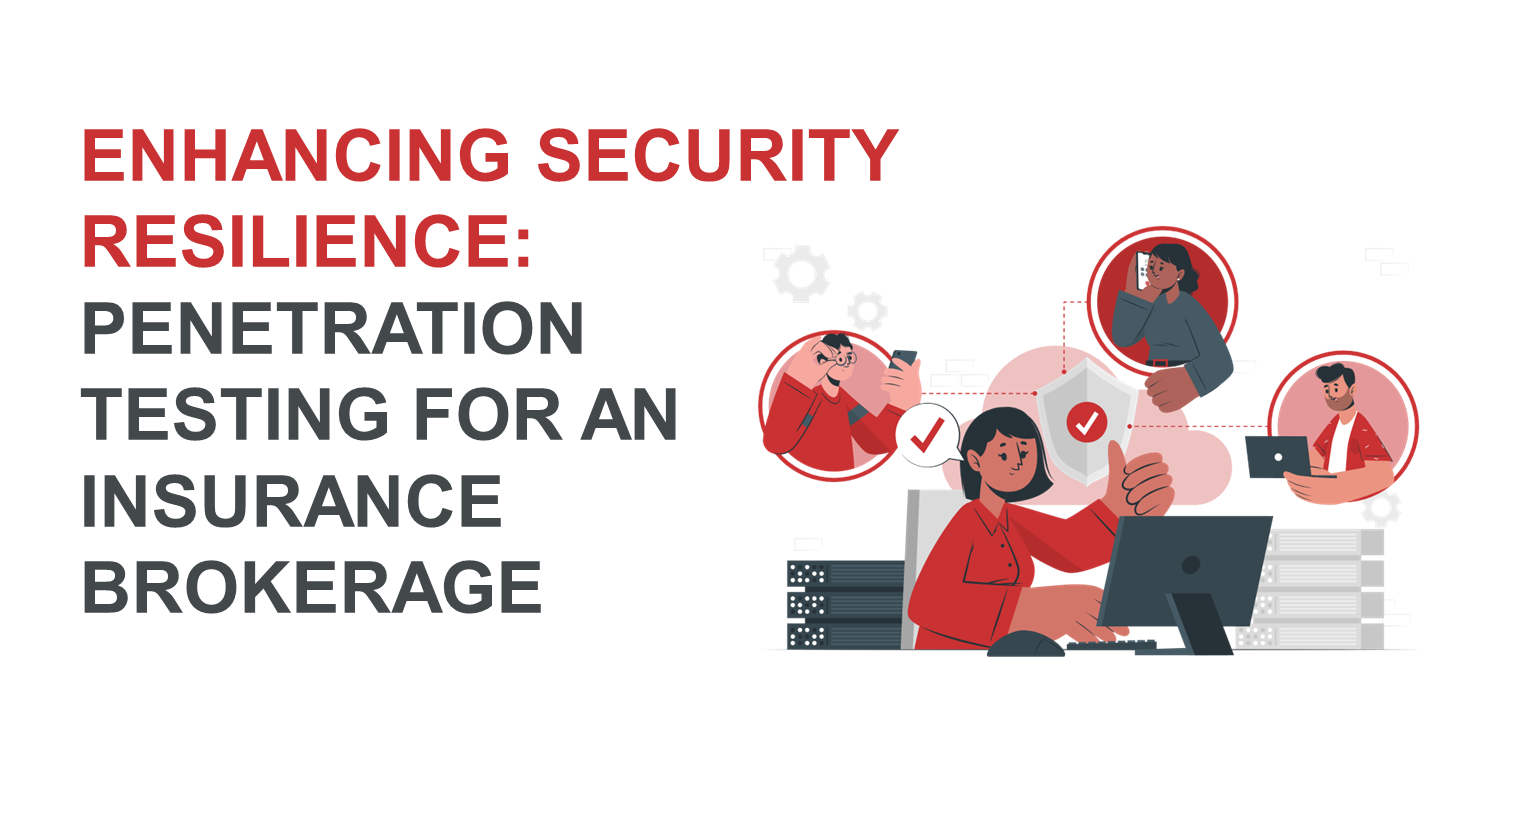 Enhancing Security Resilience: Penetration Testing for an Insurance Brokerage